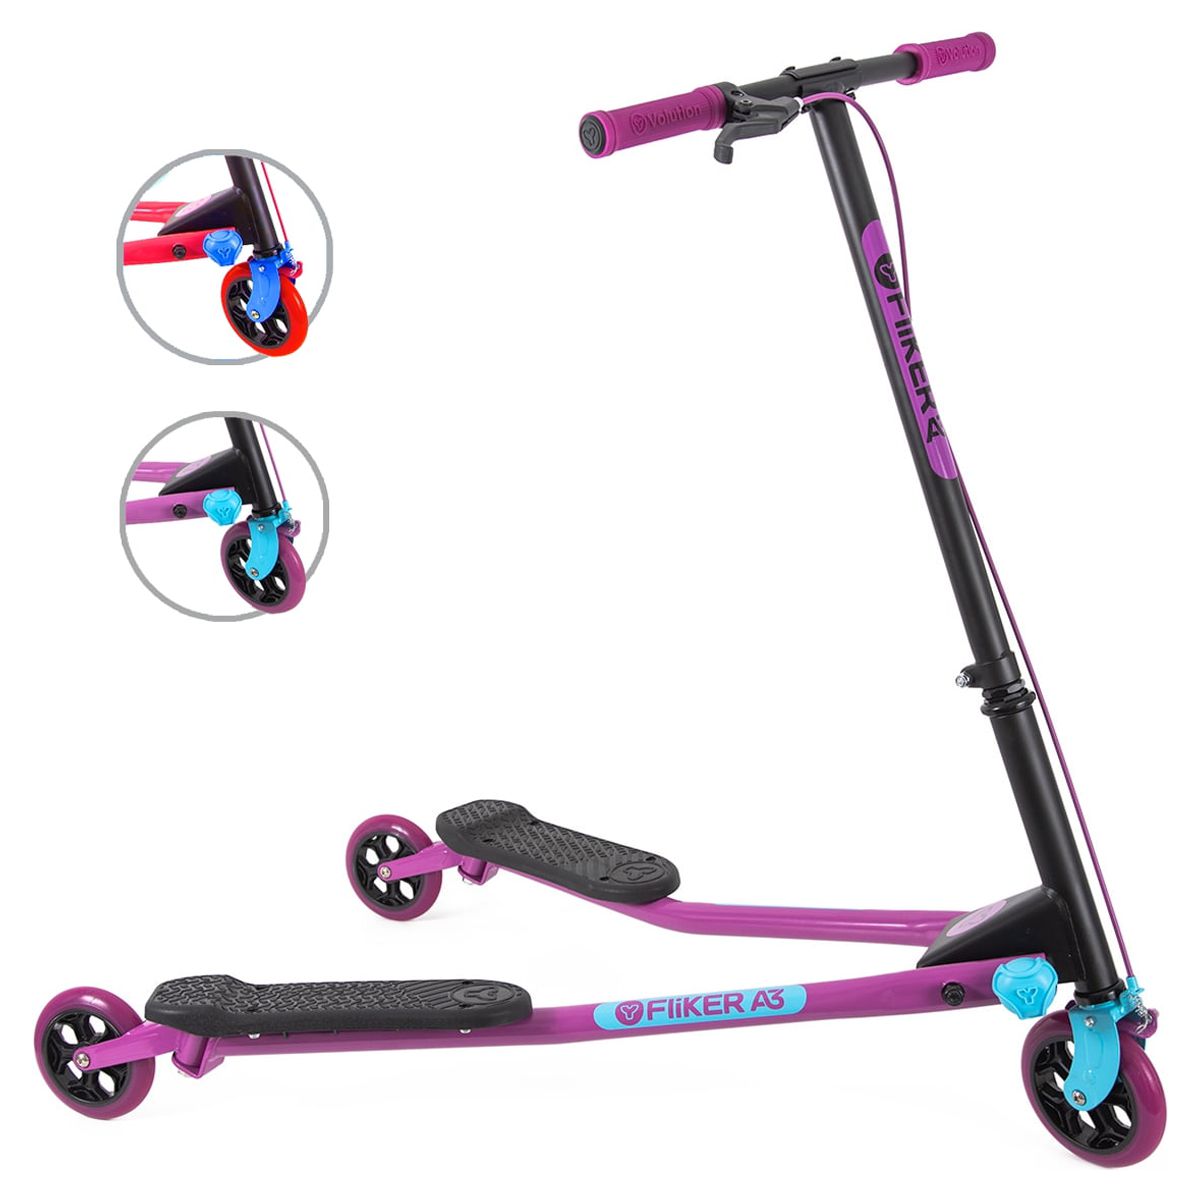 Yvolution Y Fliker Air A3 Kids Drift Scooter for Boys and Girls Ages 7+ Years (Purple) - image 1 of 8